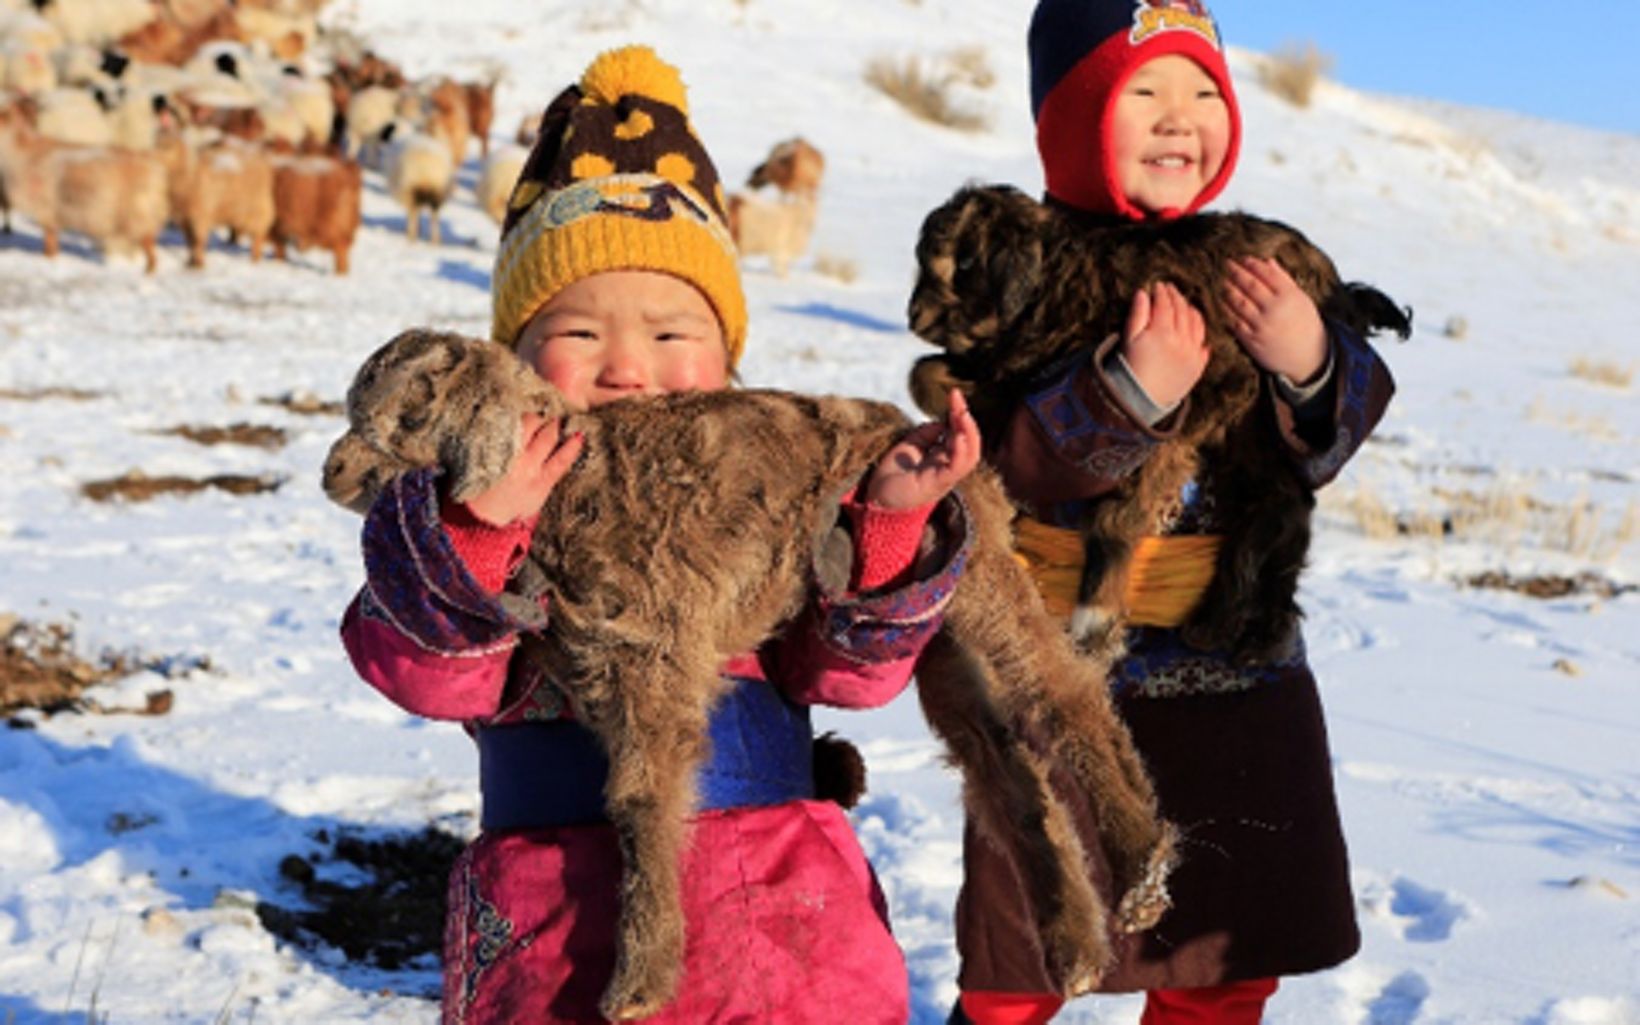 Two young Mongolian children stand in the snow while each holding a baby goat.